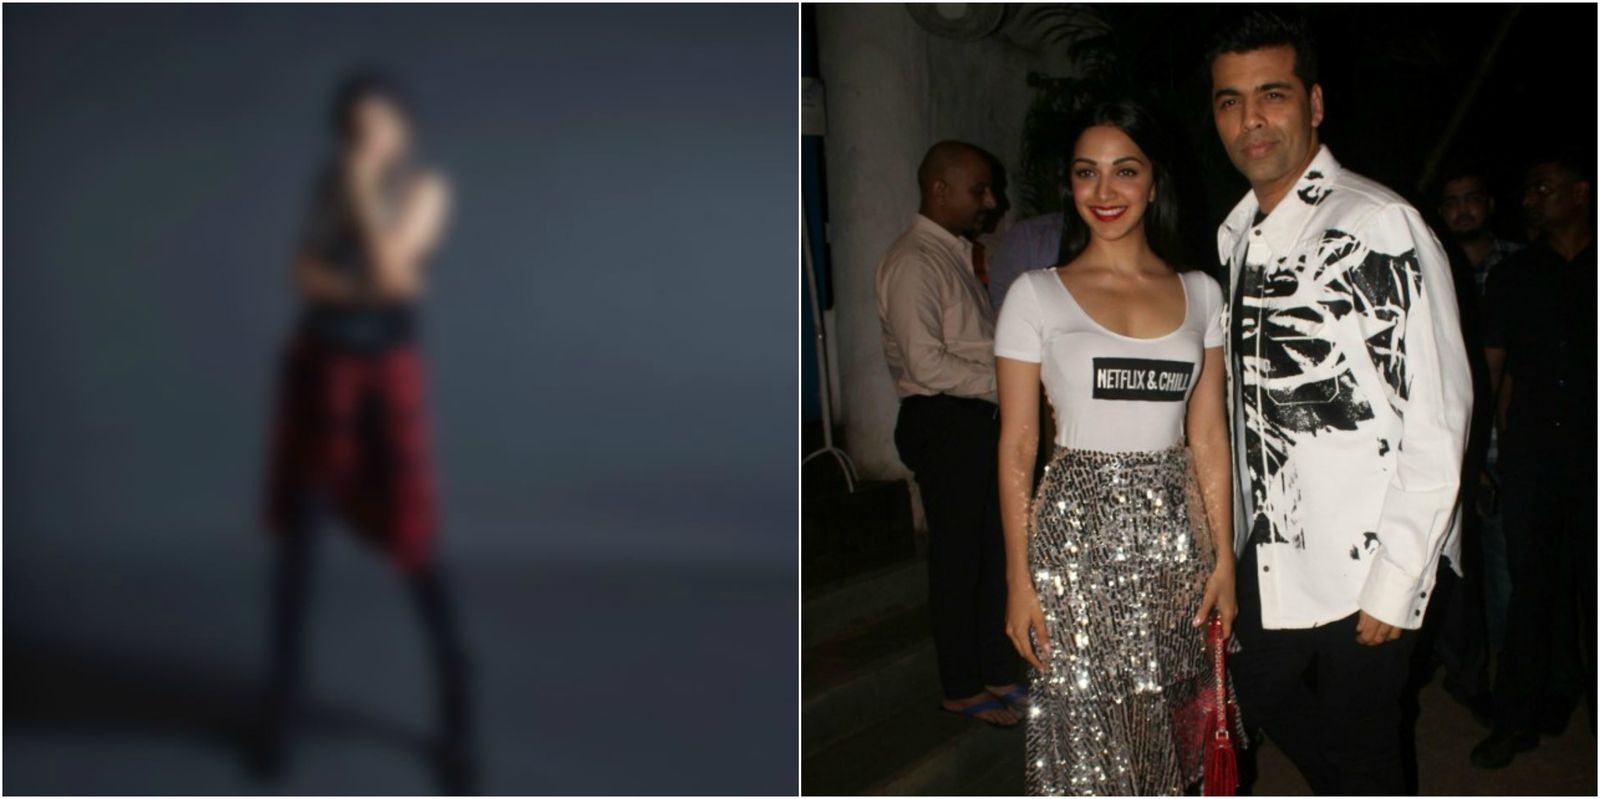 Kiara Advani's First Look From Netflix Original Guilty Is Here And We Are Intrigued